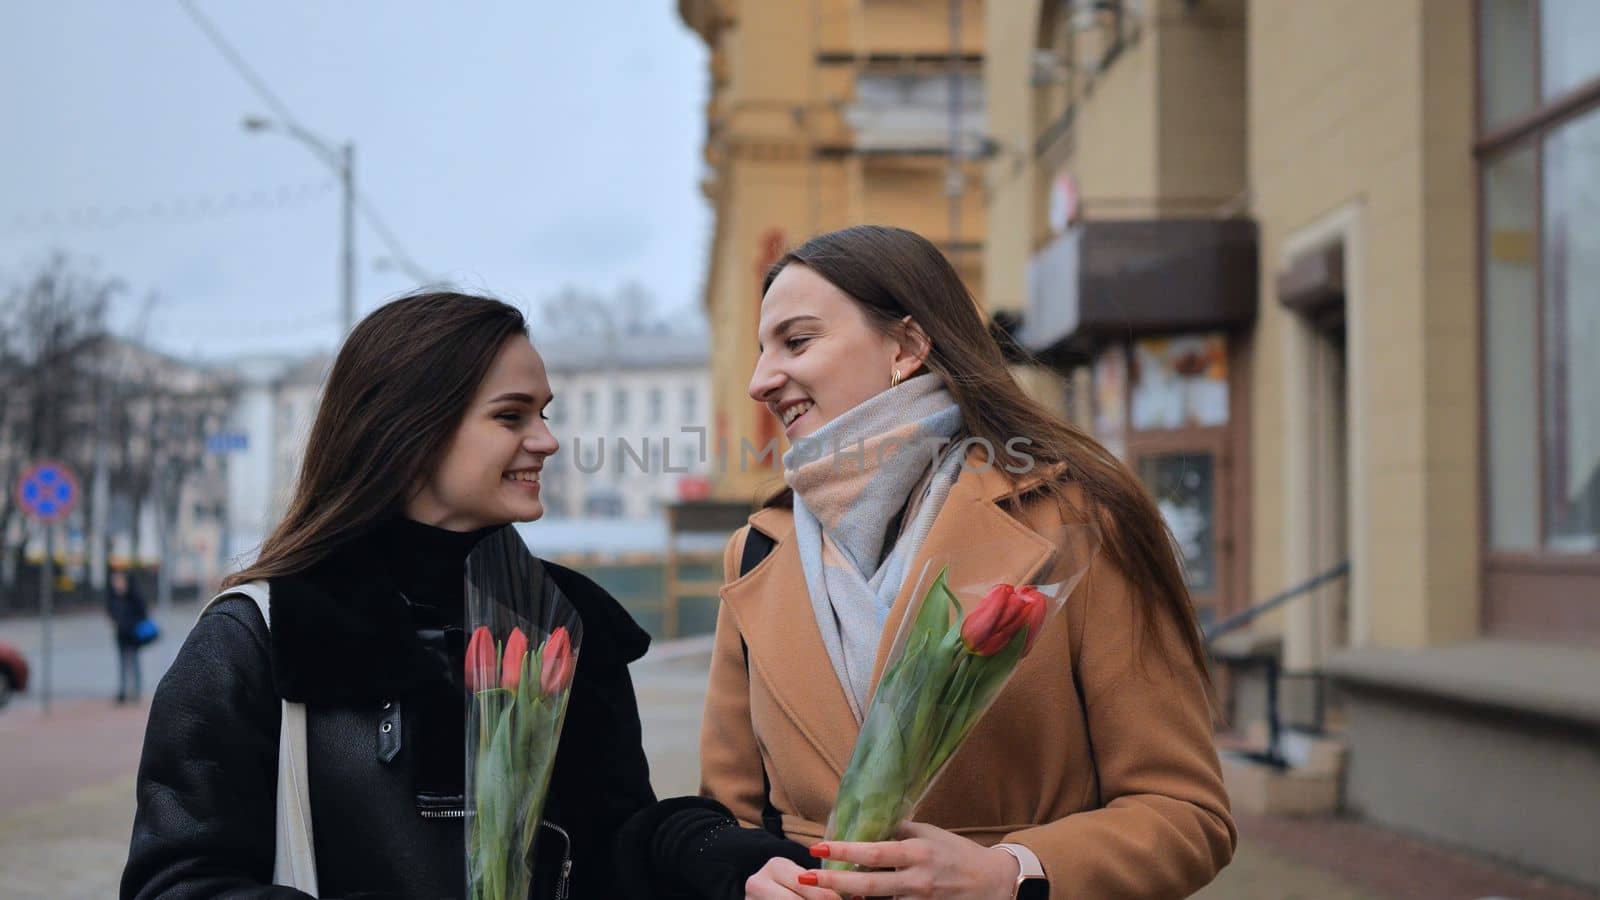 Two joyful friends in a jacket and coat are walking around the city with tulips